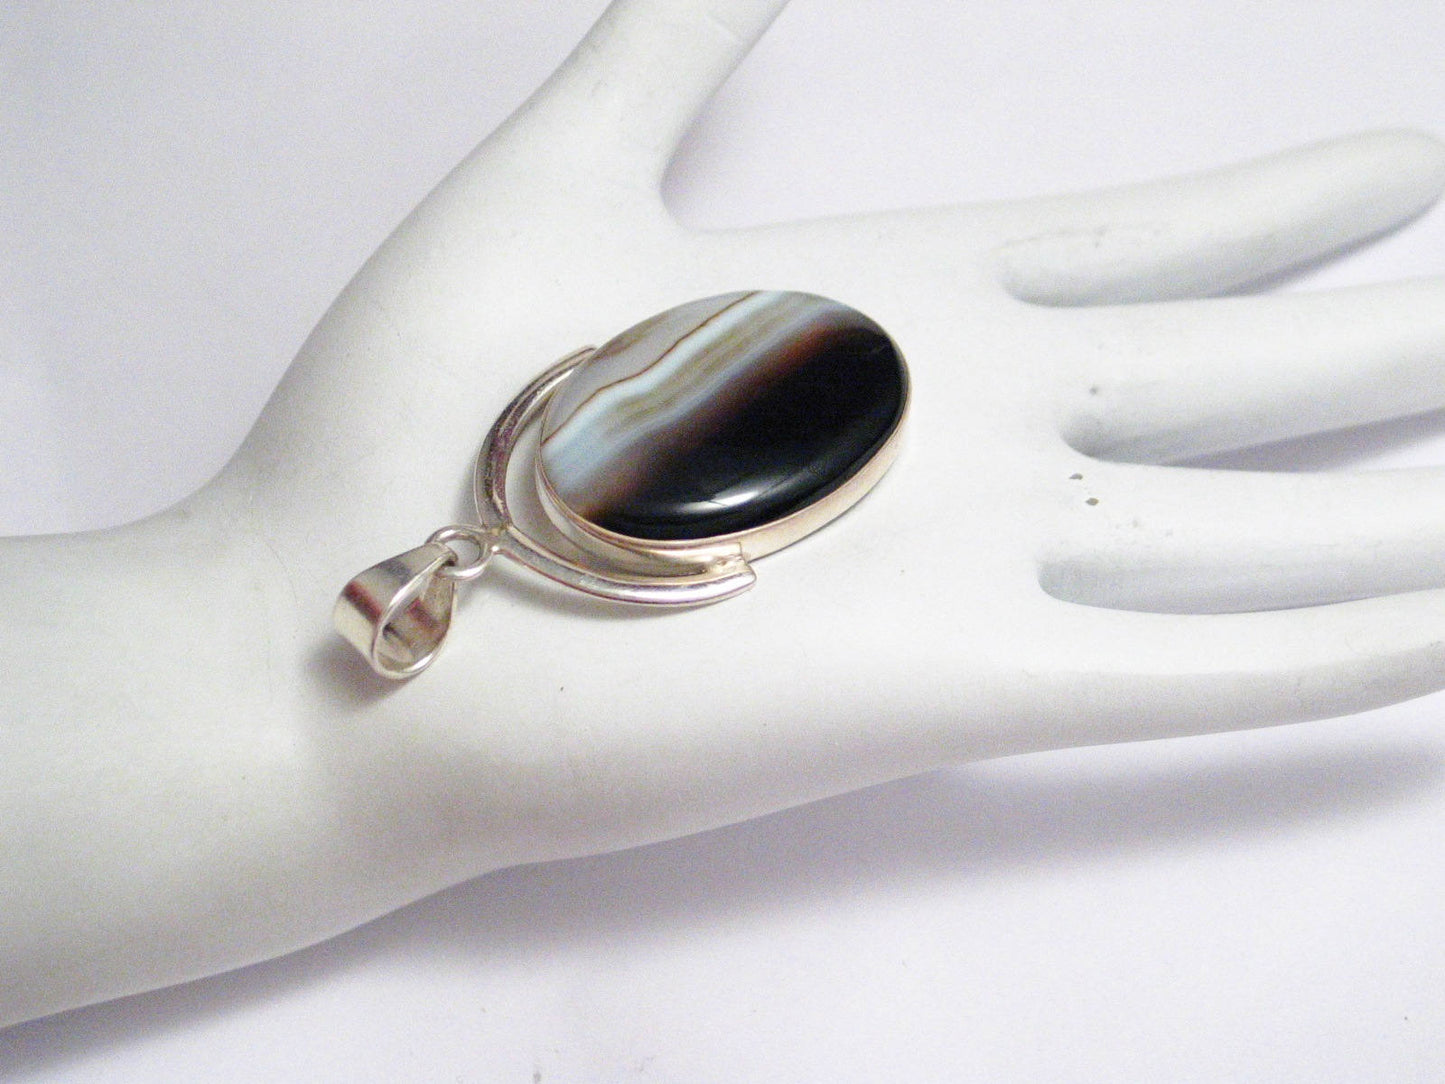 Pendant | The Yin & Yang Large Sterling Silver Oval Banded Agate Stone Pendant | Jewelry